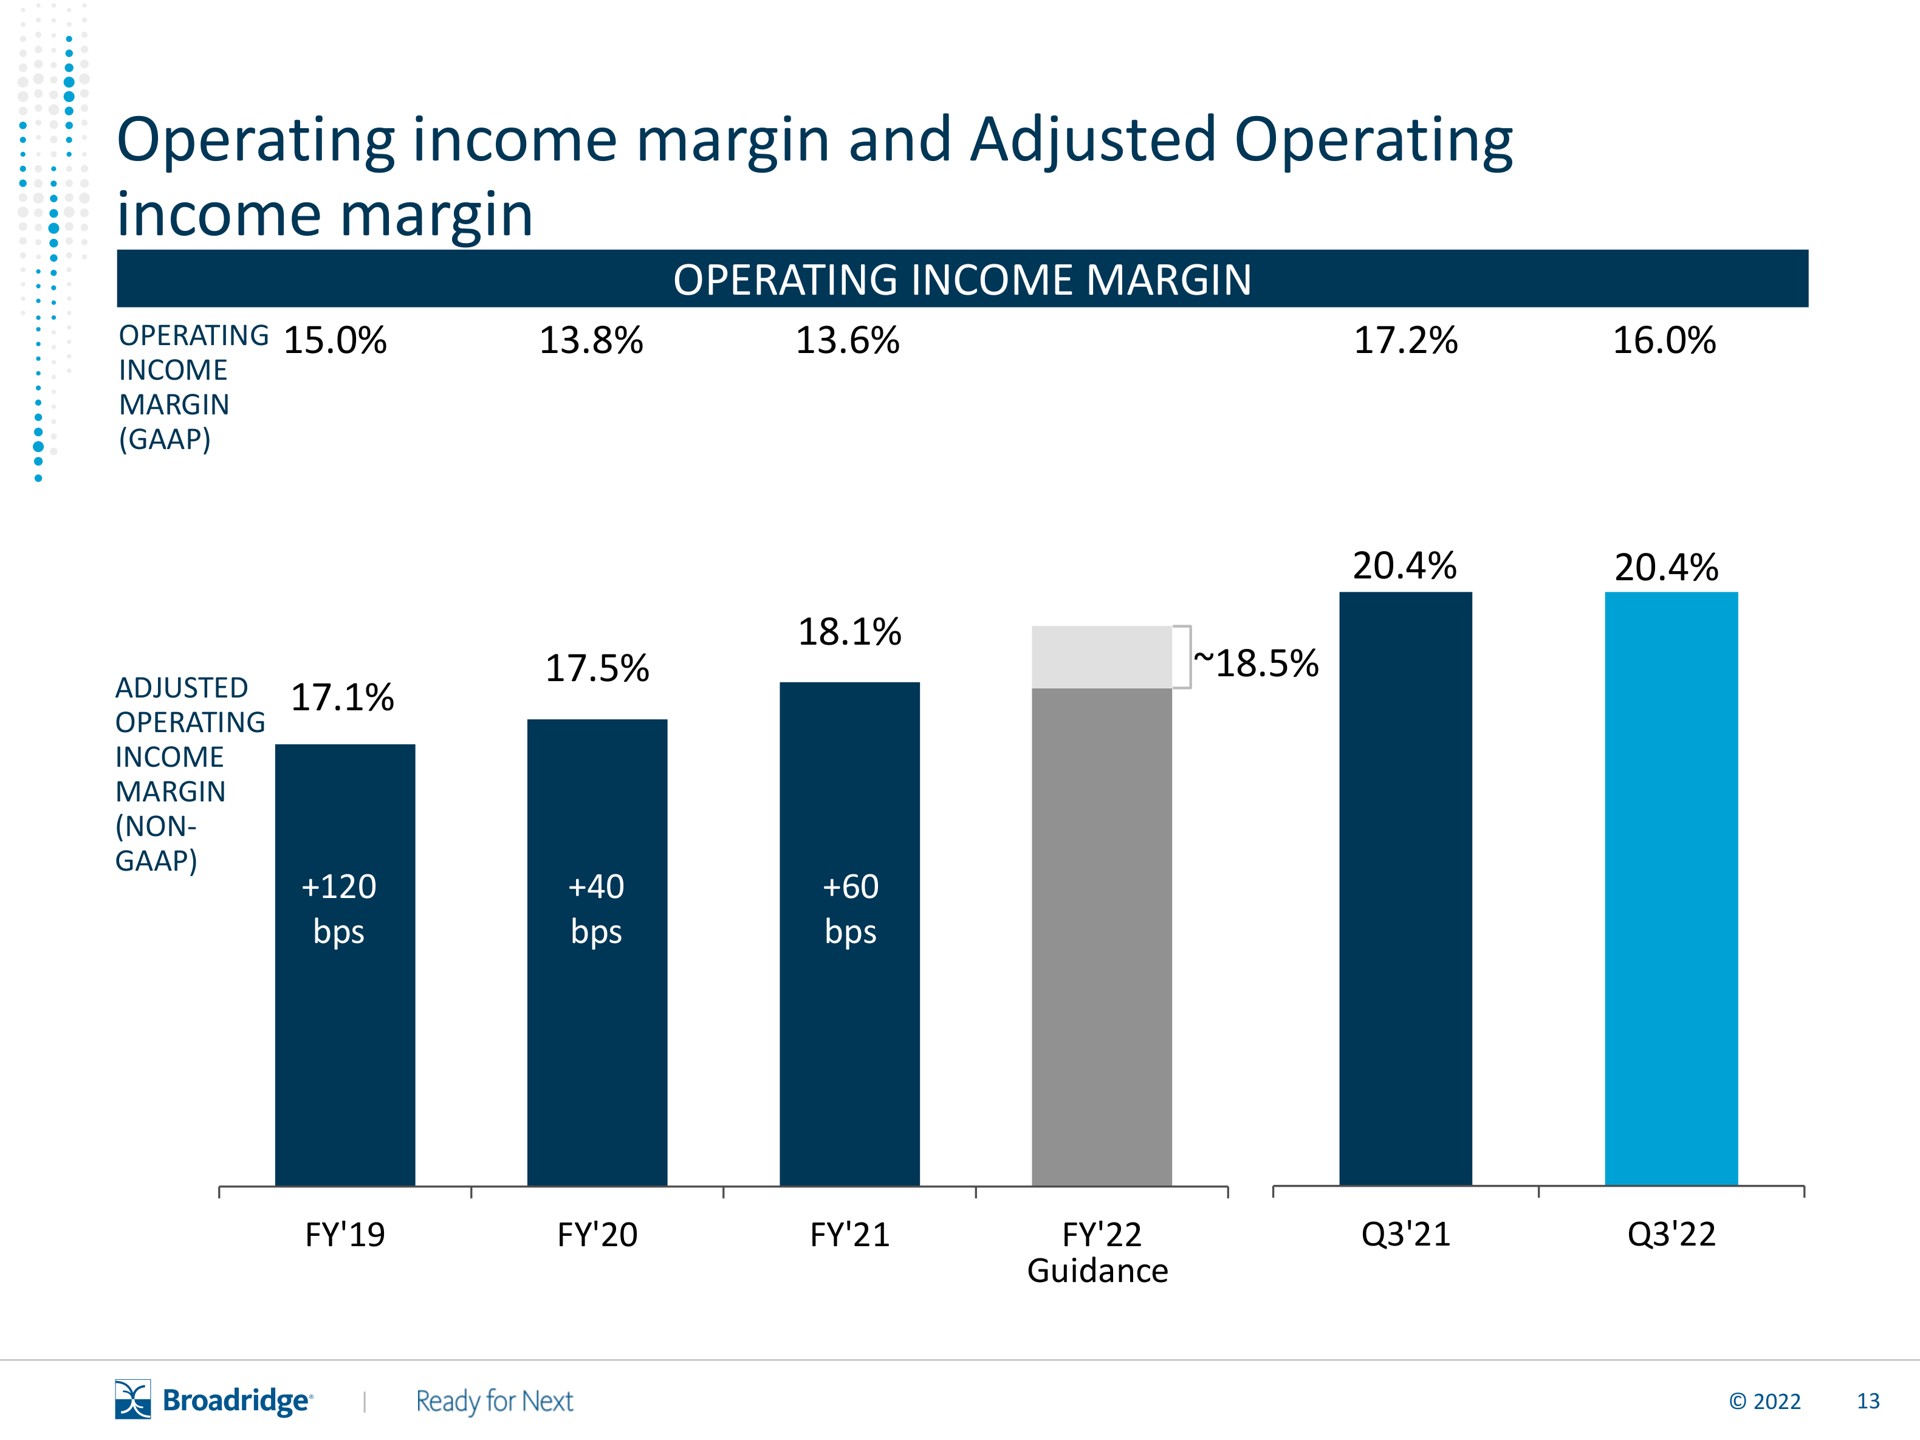 operating income margin and adjusted operating income margin | Broadridge Financial Solutions